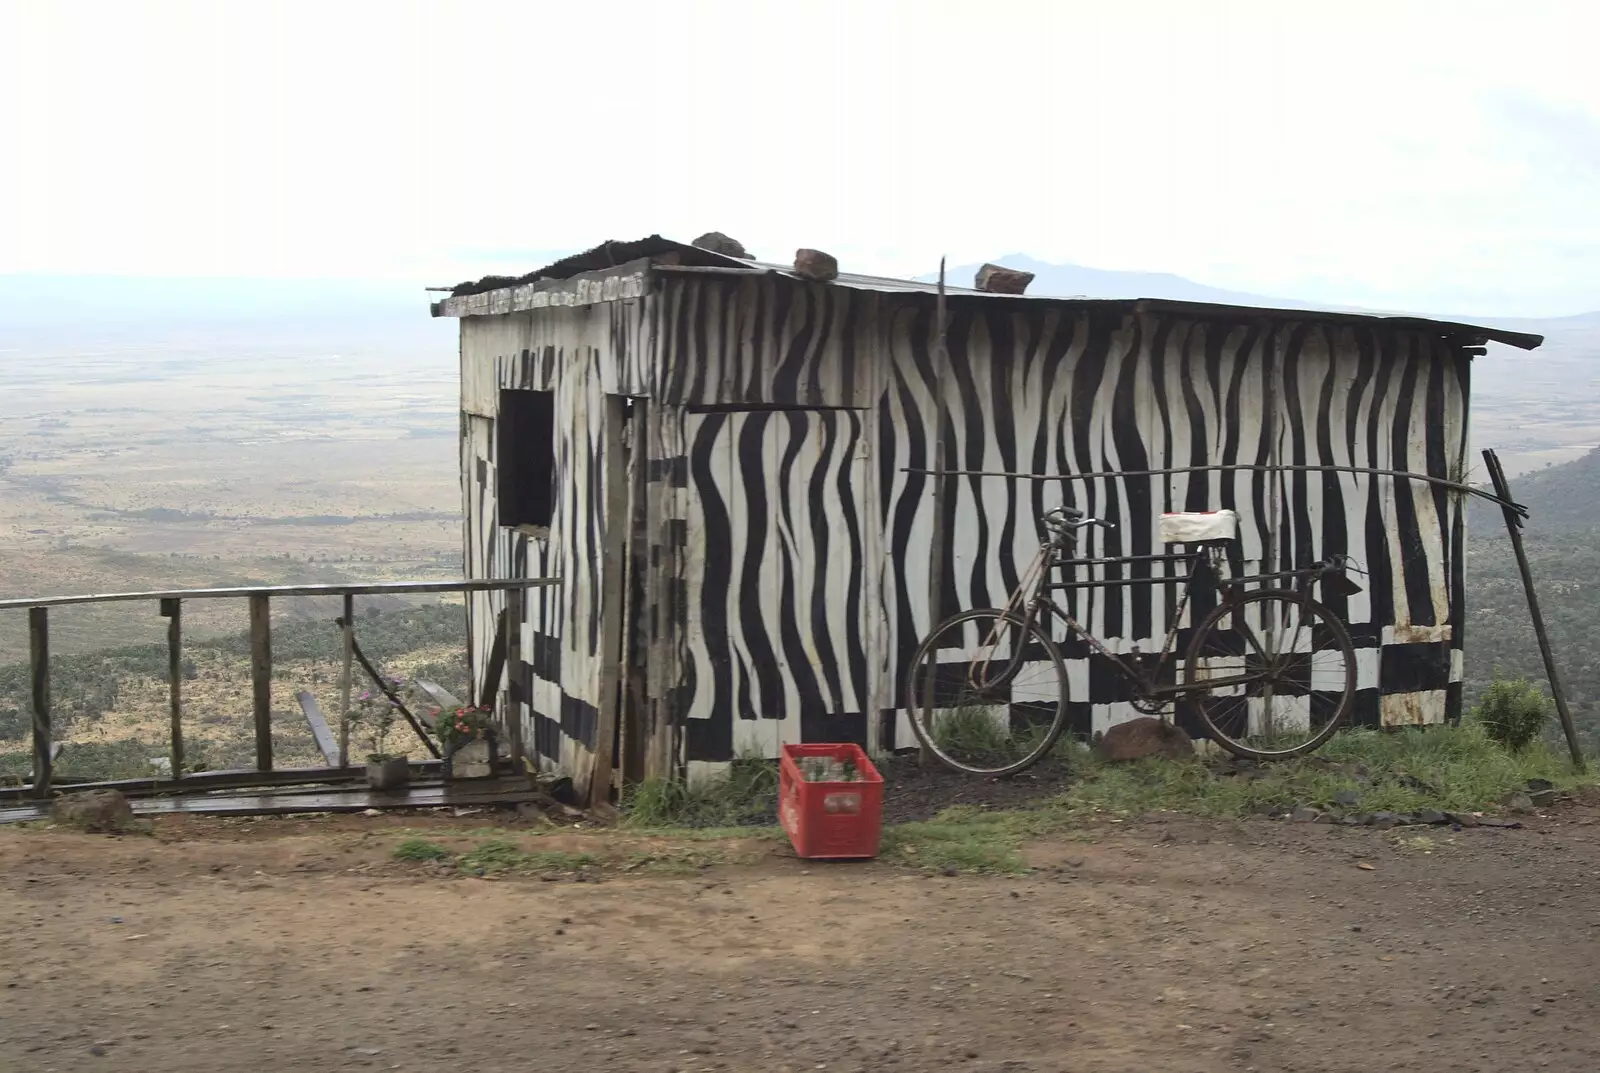 A zebra-striped hut looks out over the Rift Valley, from Nairobi and the Road to Maasai Mara, Kenya, Africa - 1st November 2010